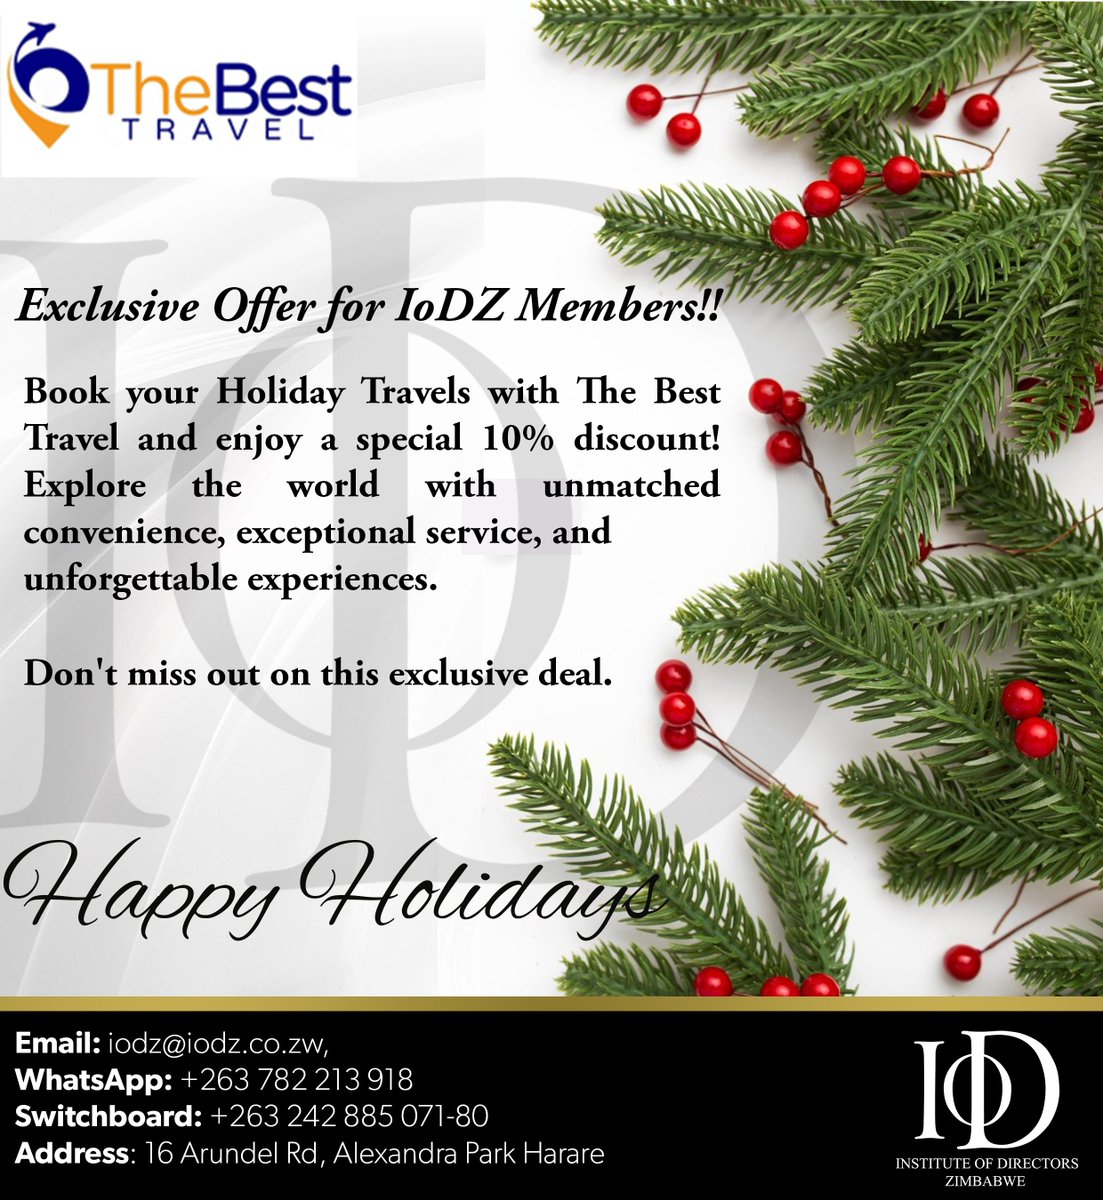 Calling All IoDZ Members. Experience the ultimate vacation with The Best Travel and delight in a thrilling 10% discount. Seize this limited time deal and start planning your unforgettable escape.